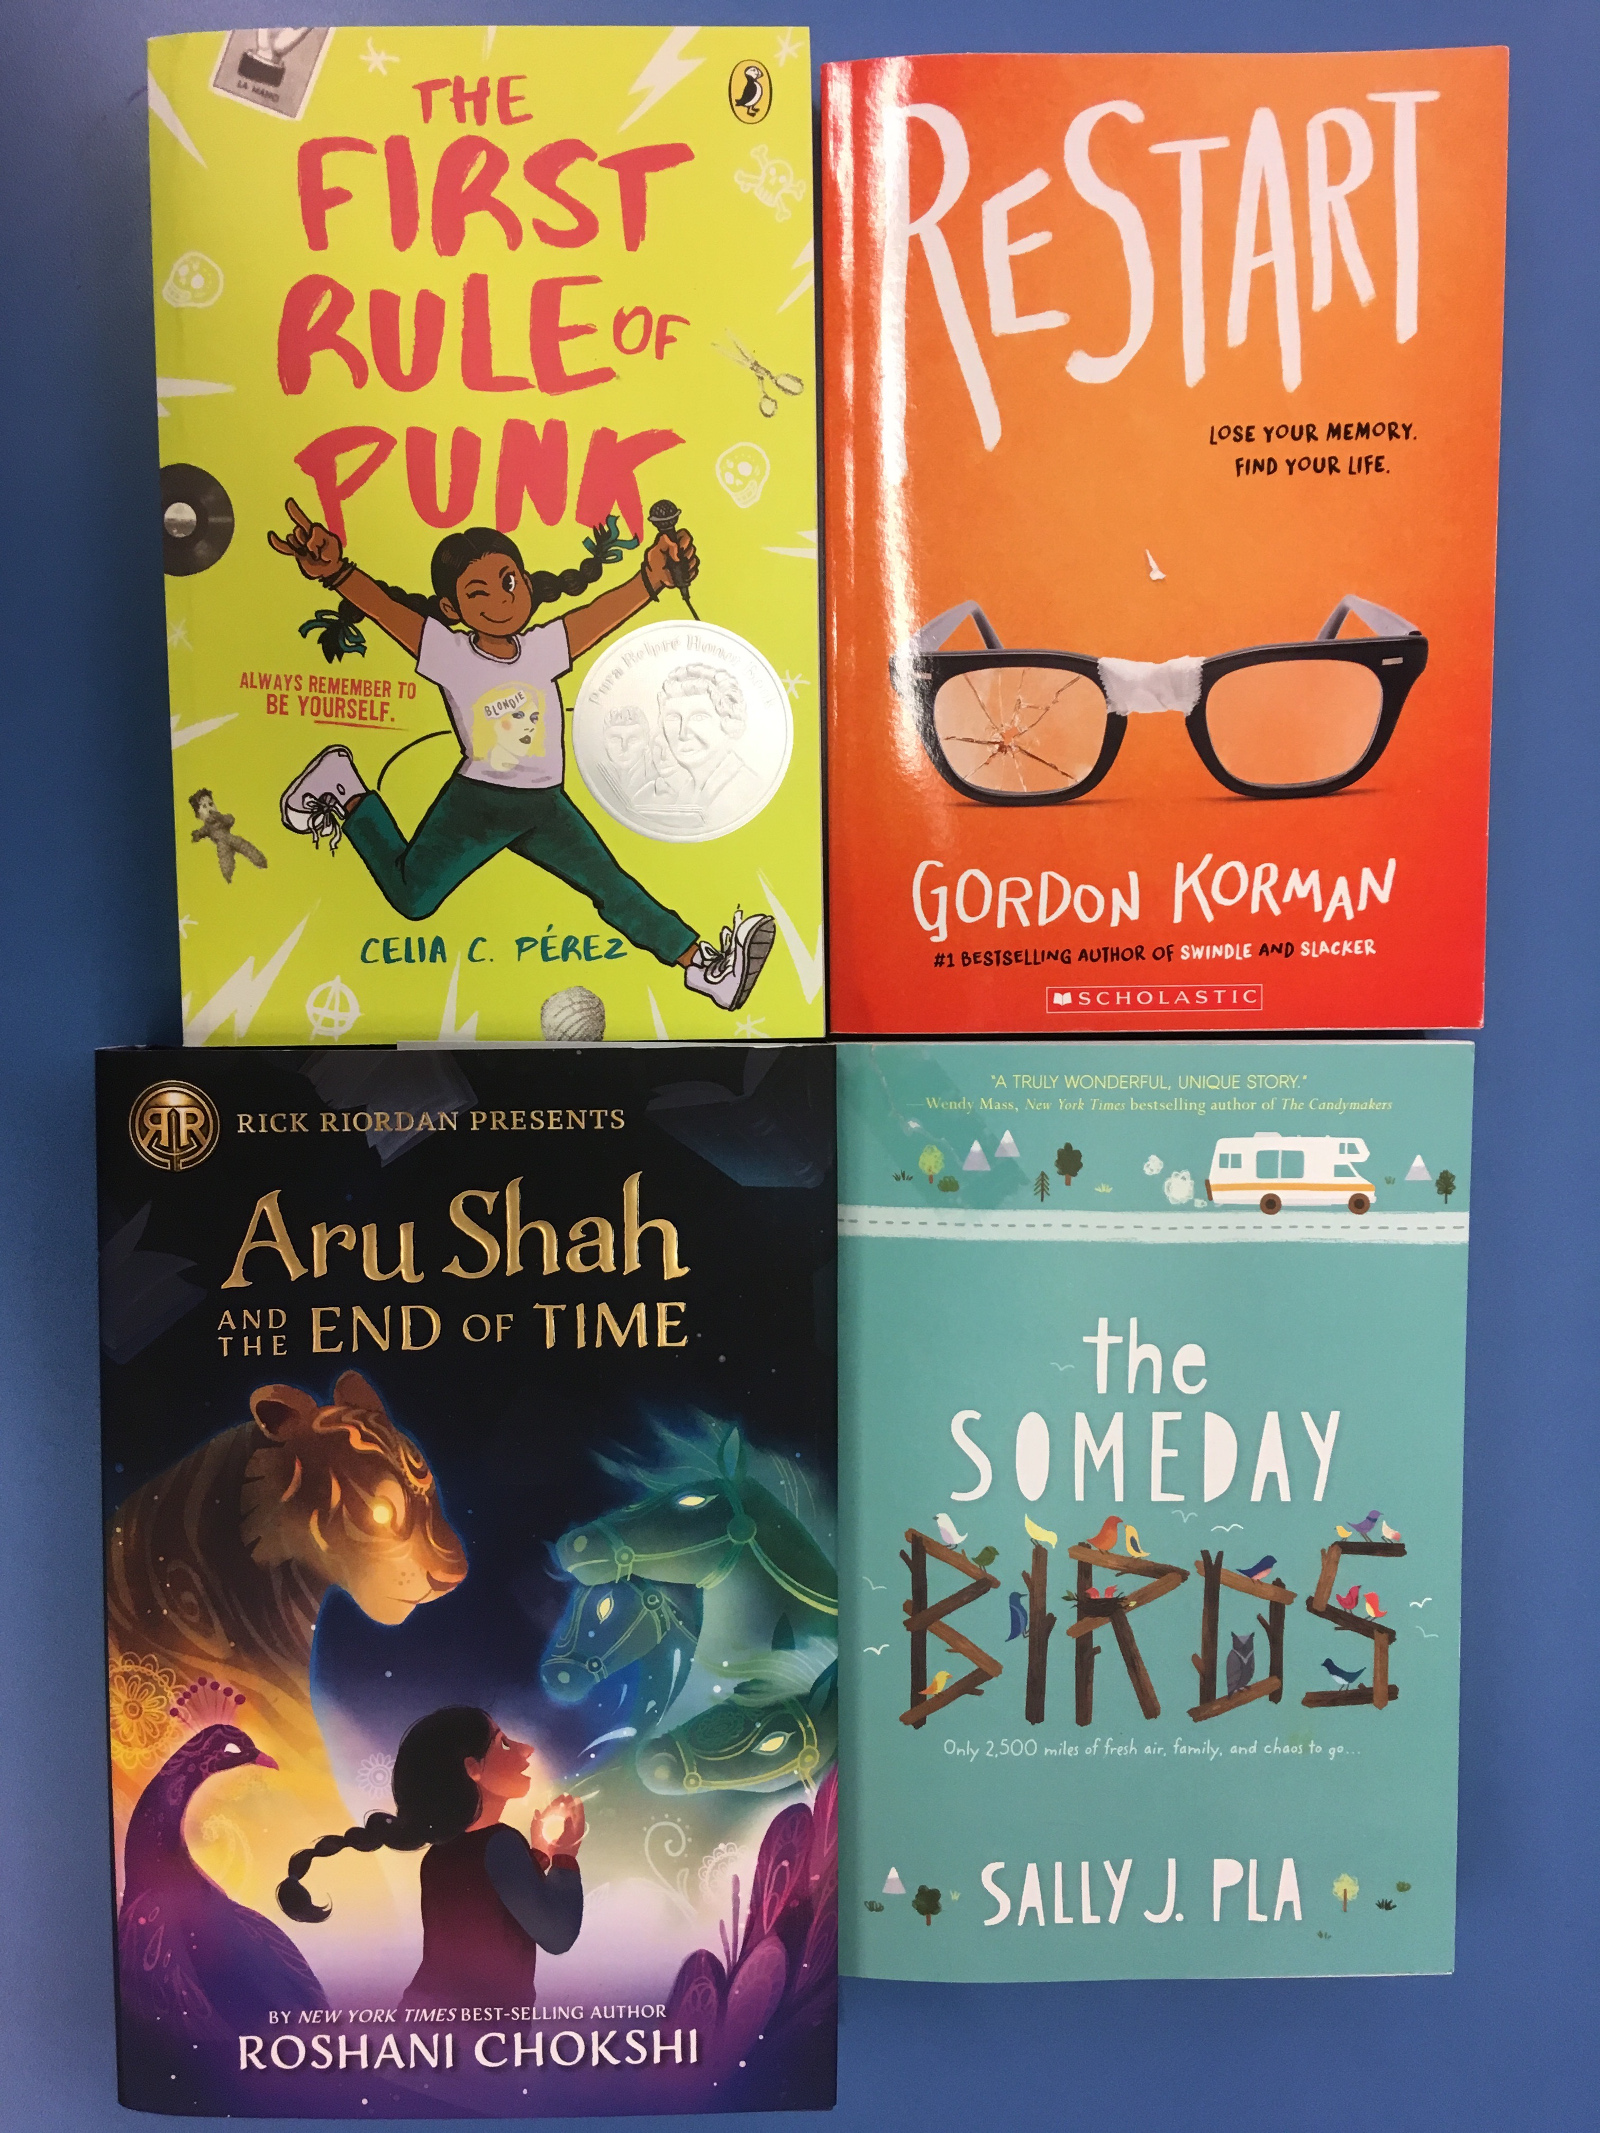 Covers of the books we'll be reading in tween reads.